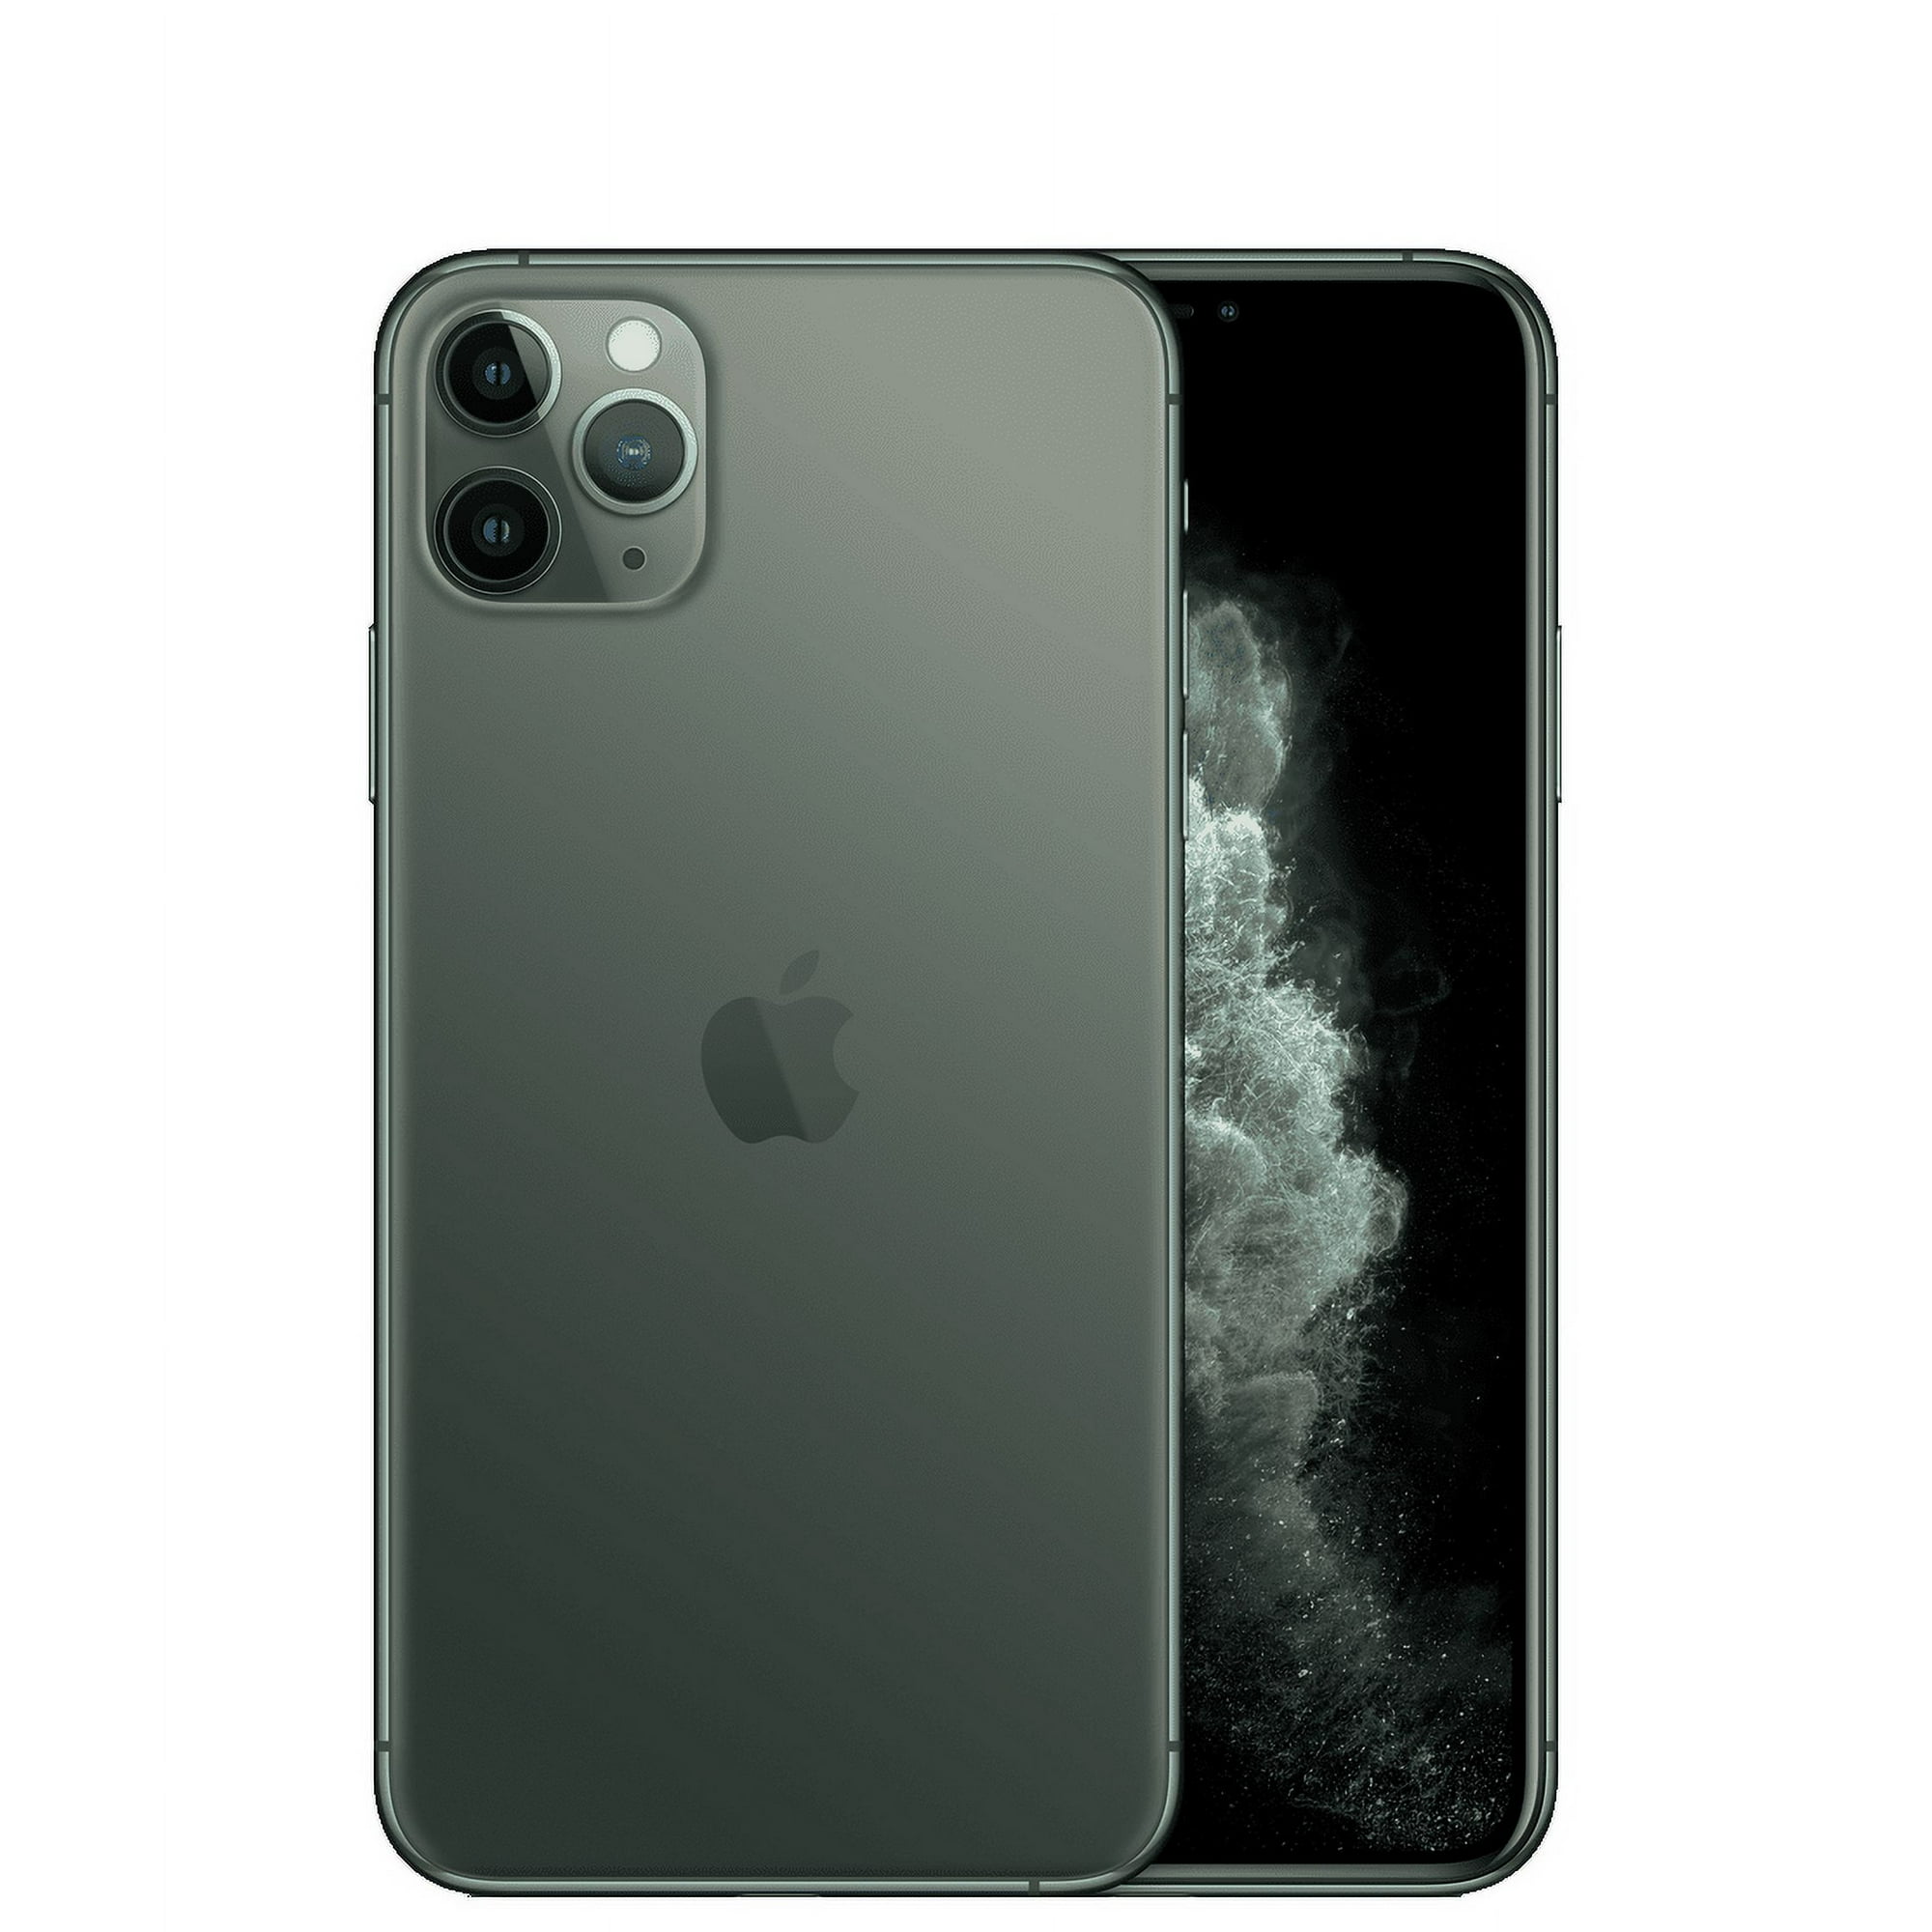 Restored Apple iPhone 11 Pro Max 64GB Factory GSM Unlocked TMobile AT&T 4G LTE Green (Refurbished)